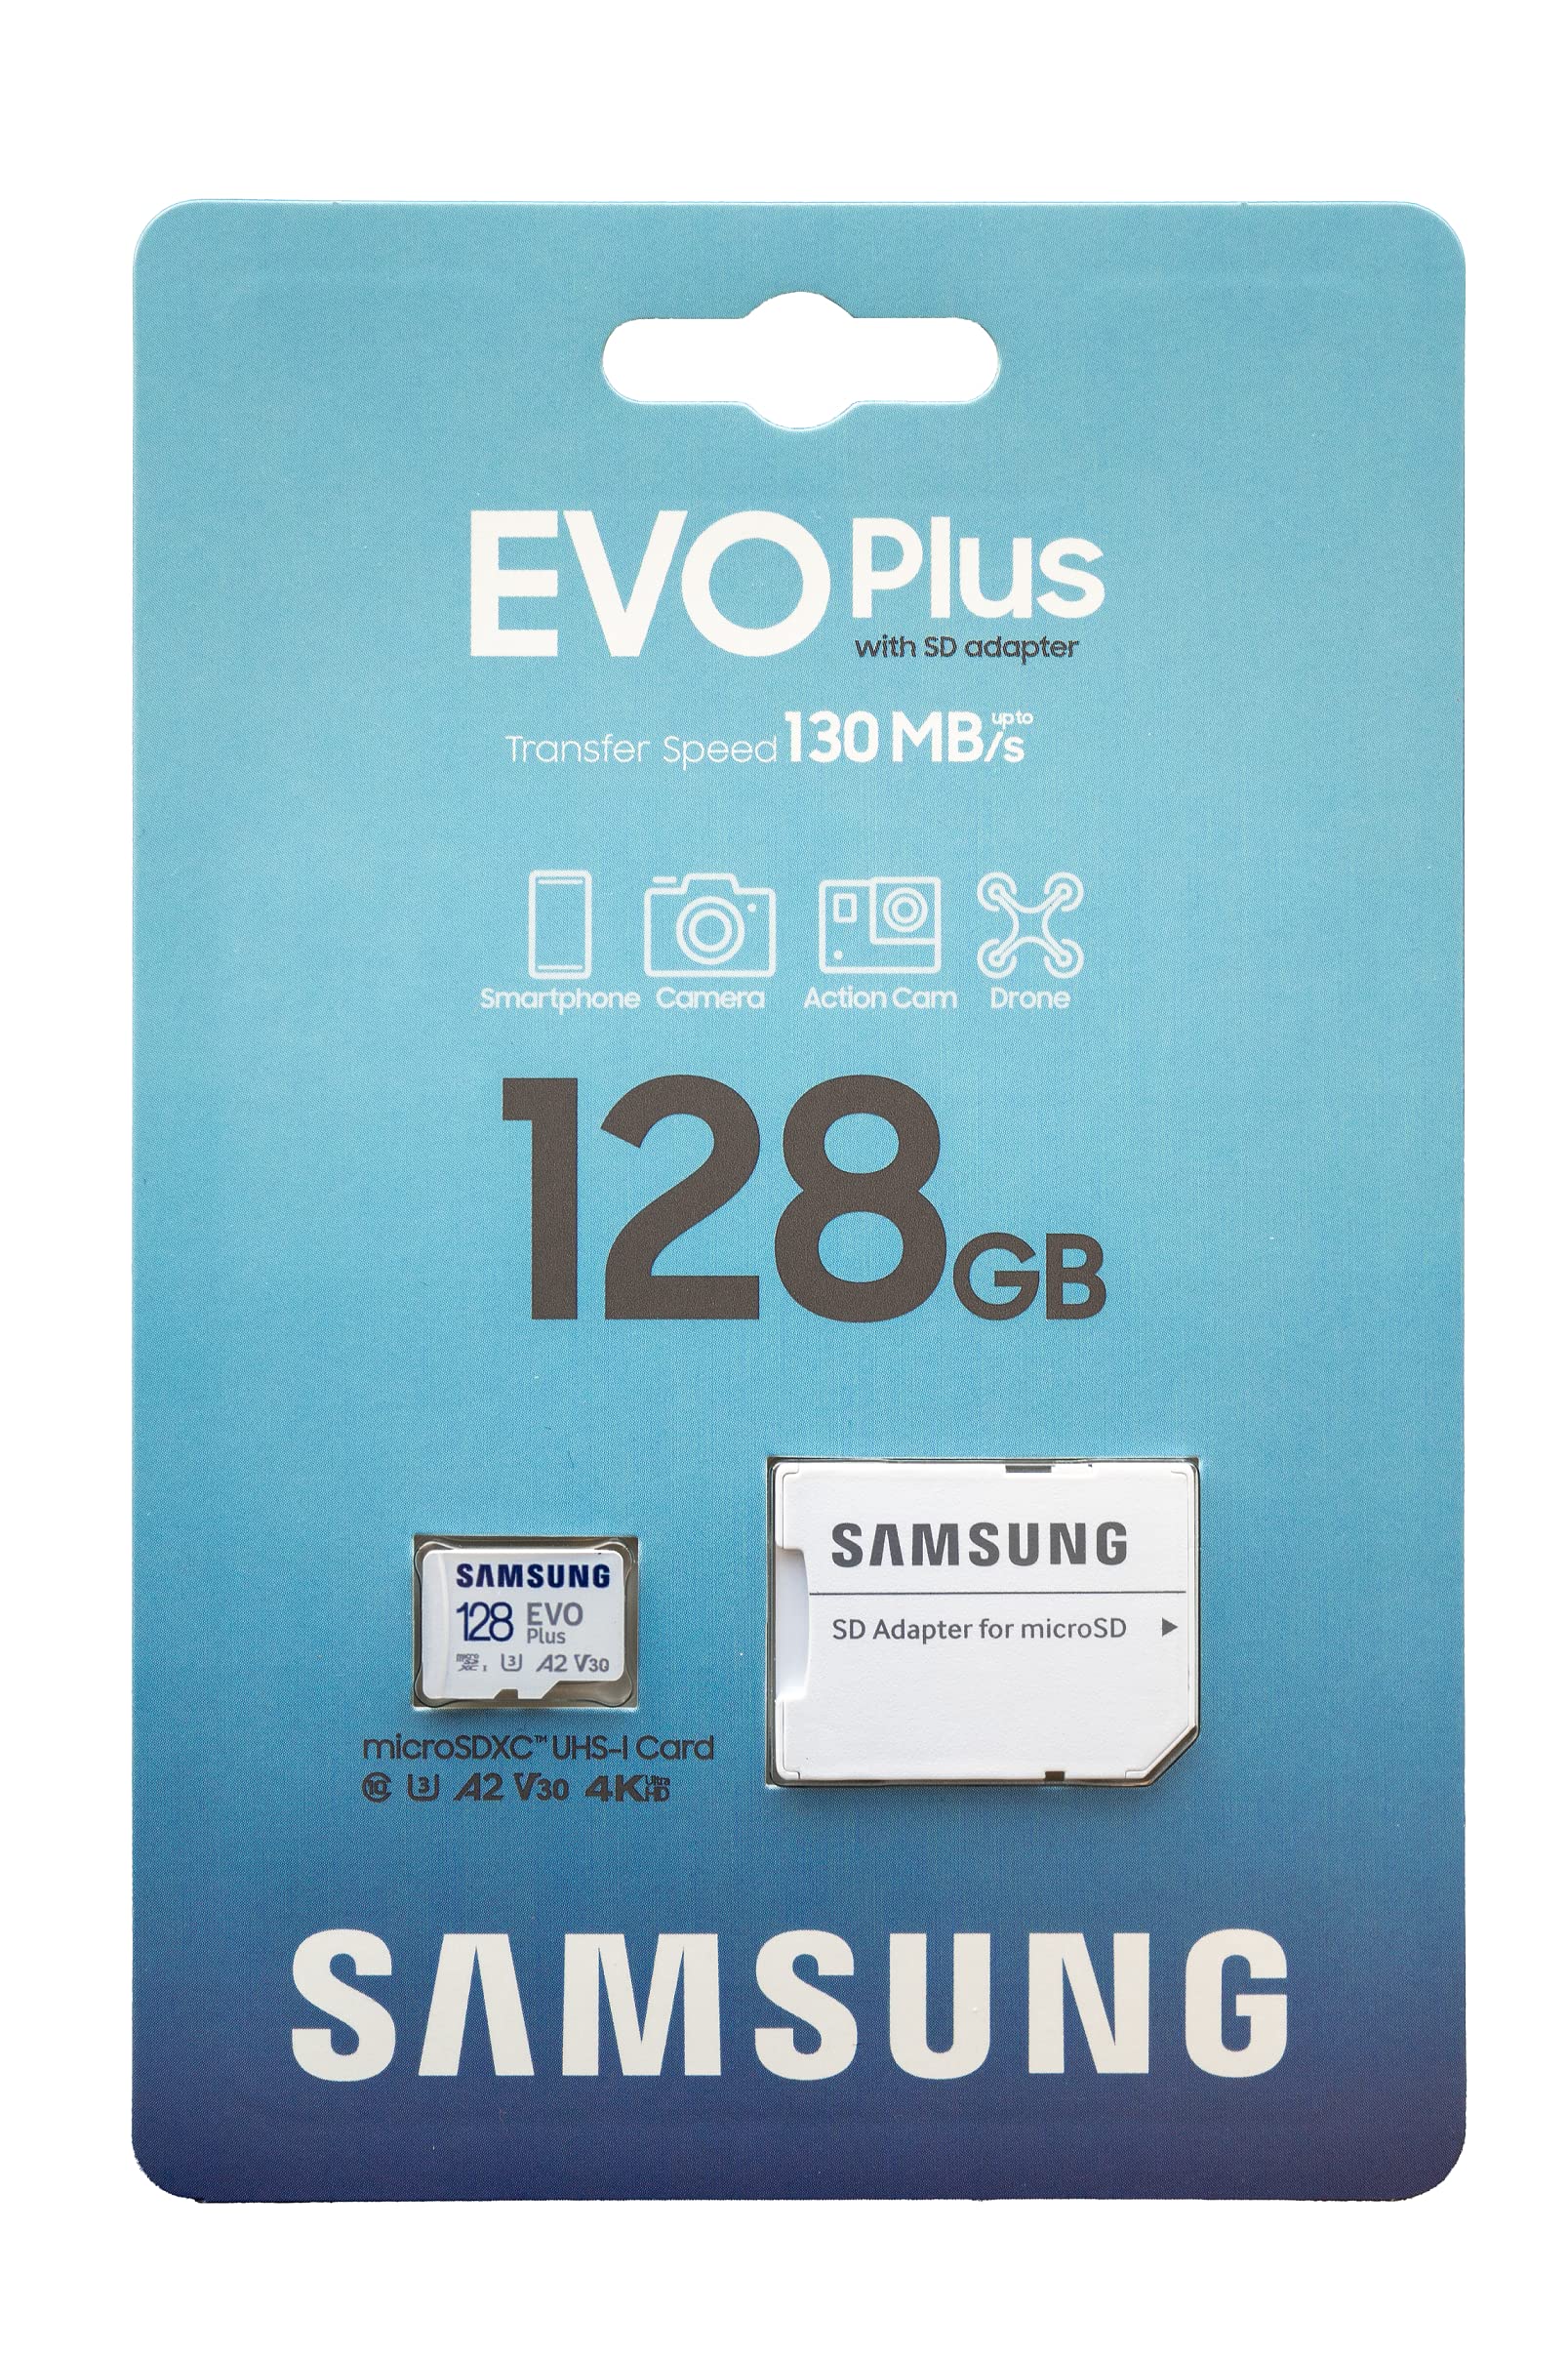 Samsung 128GB SDXC Micro EVO Plus Memory Card with Adapter Works with Samsung Phone A52s 5G, A22 5G, A13 5G (MB-MC128) Class 10 U3 A2 V30 Bundle with (1) Everything But Stromboli TF & SD Card Reader